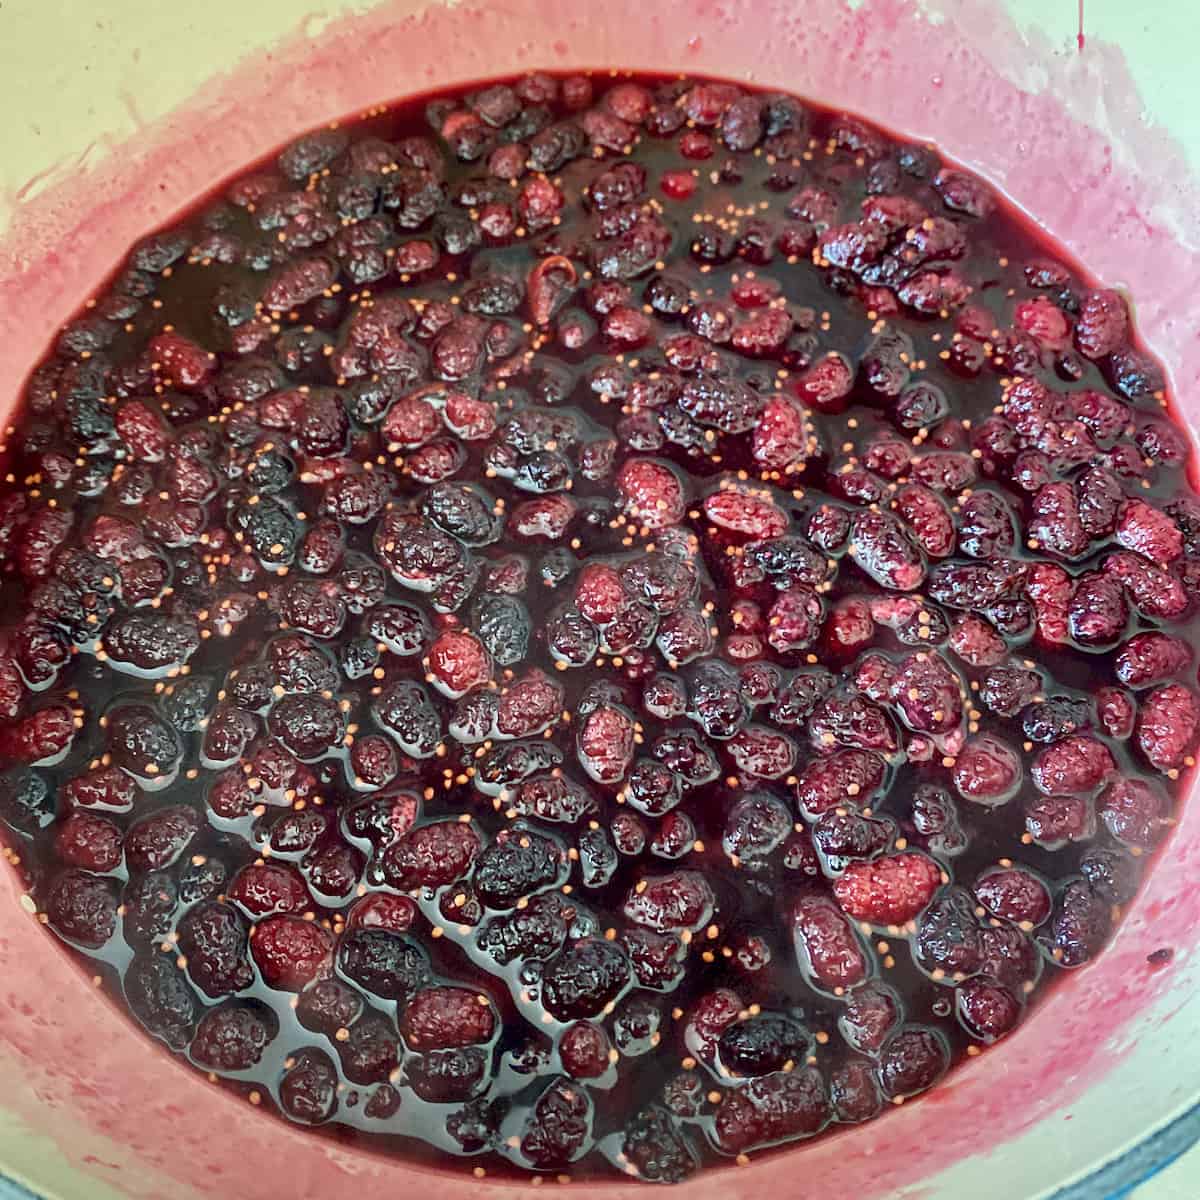 Jam it out stewed mulberries.